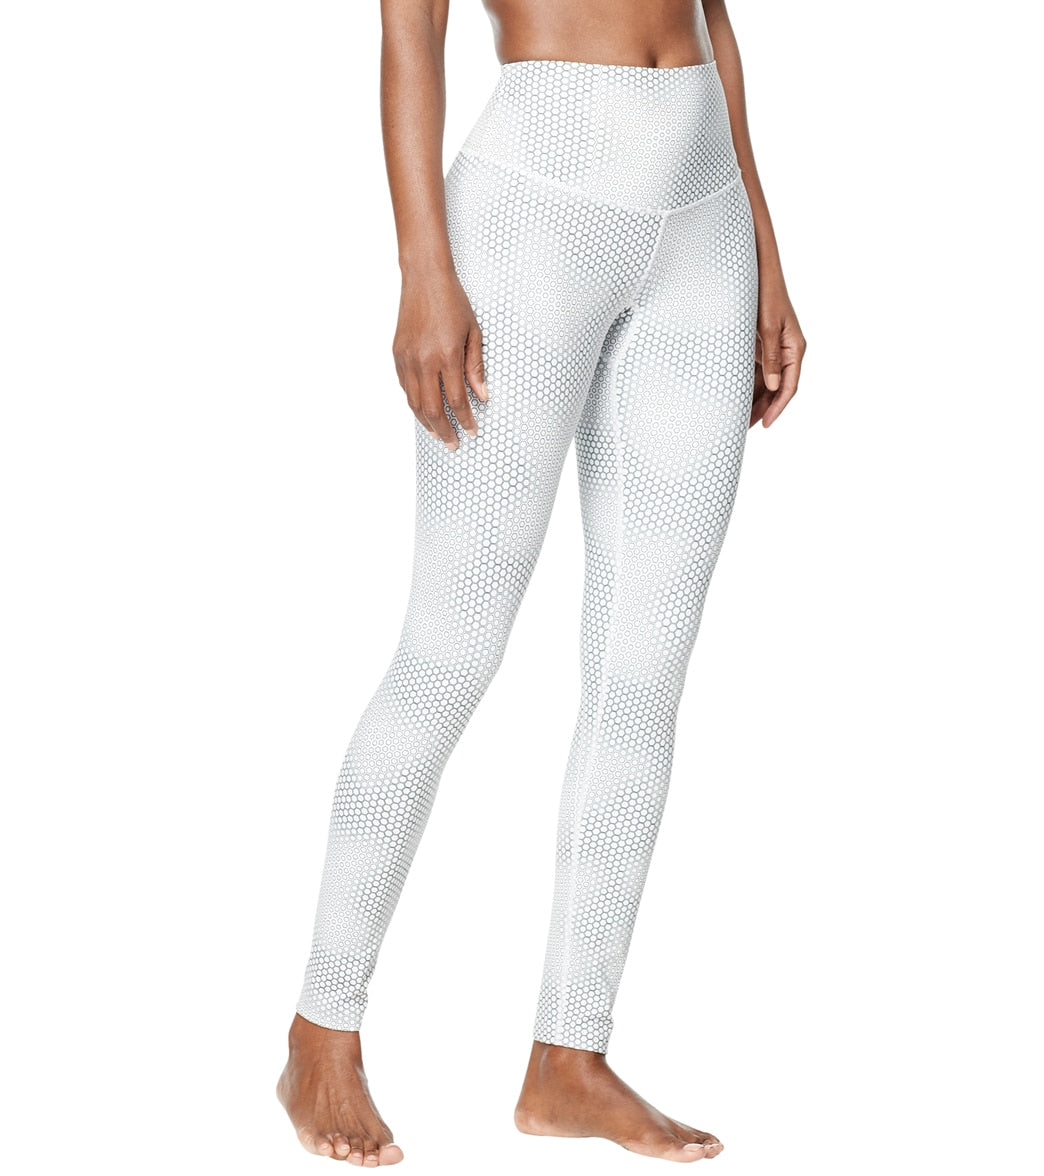 Speedo Active Women's Printed Tights - White Large Size Large - Swimoutlet.com